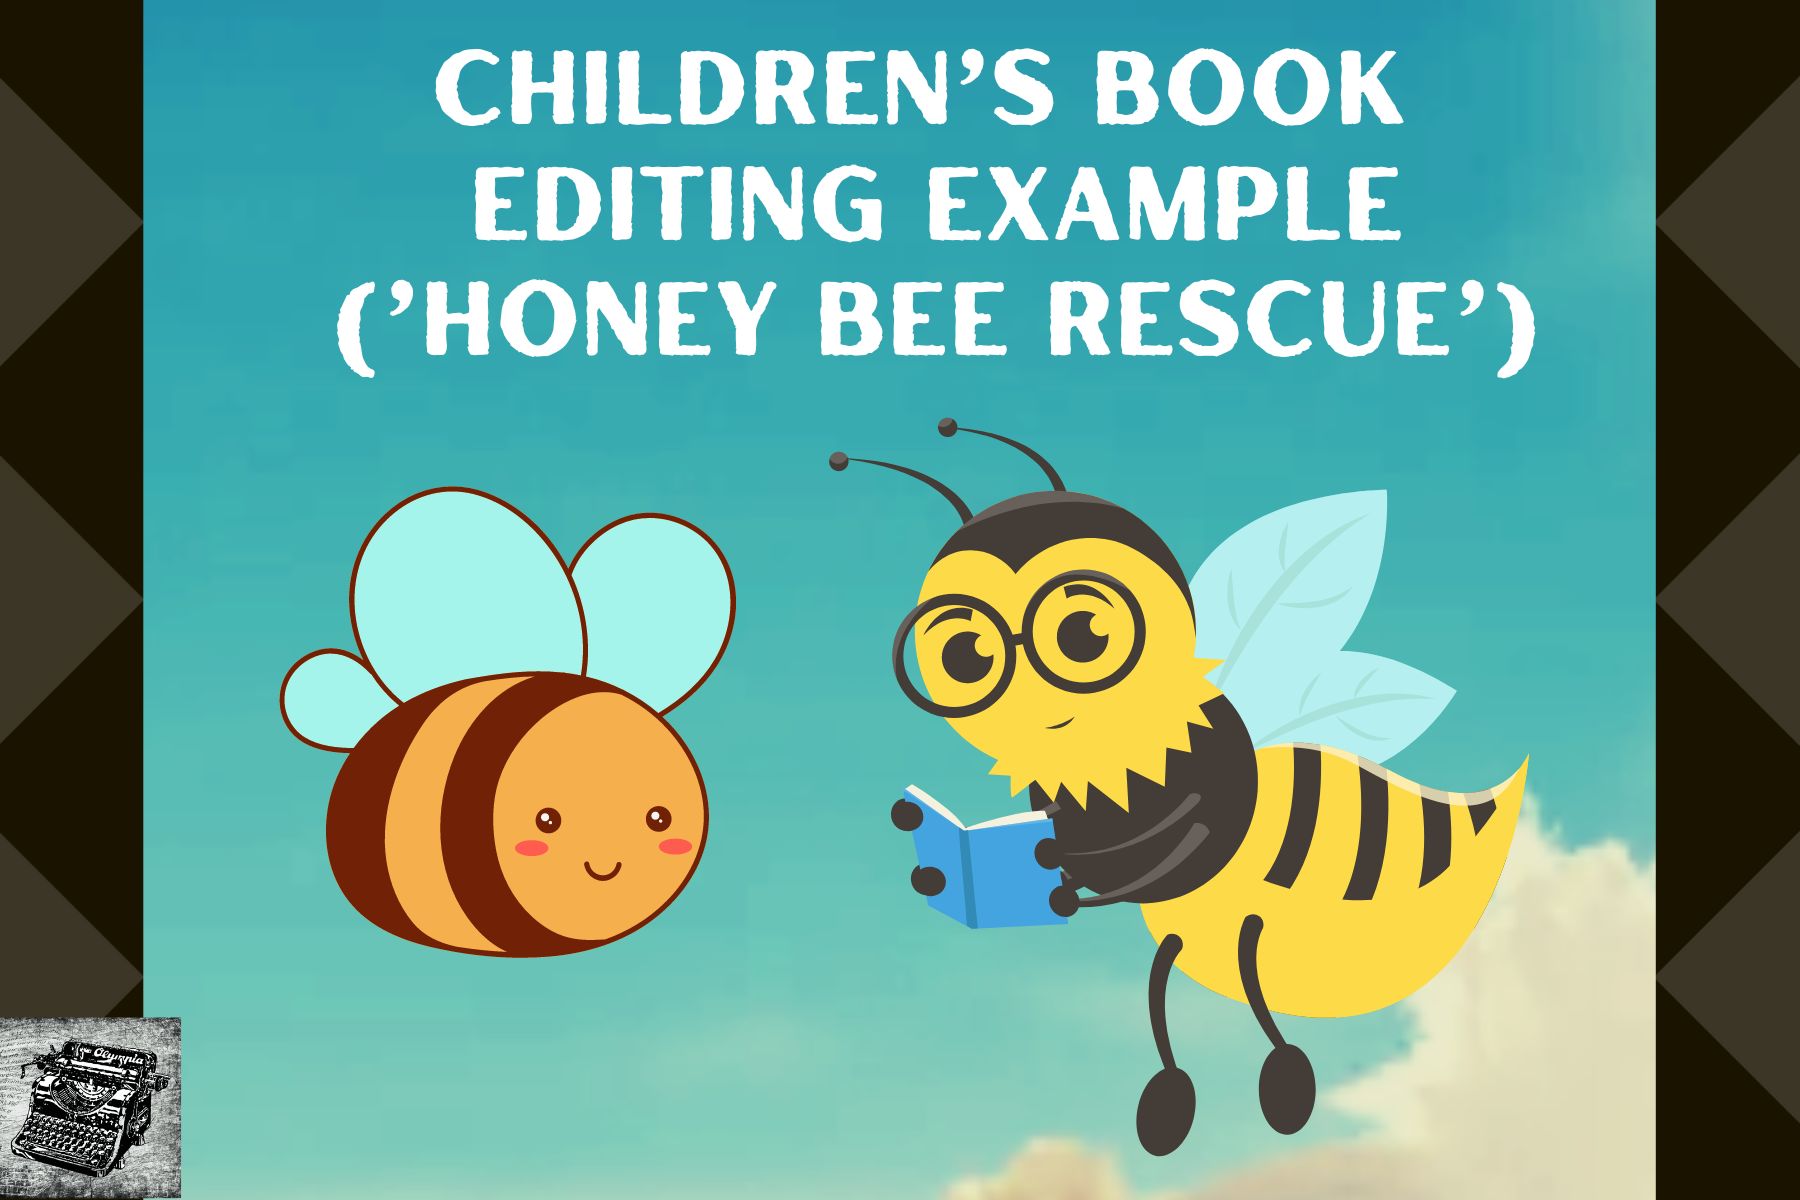 ‘Honey Bee Rescue’ – Editing Example of a Children’s Story